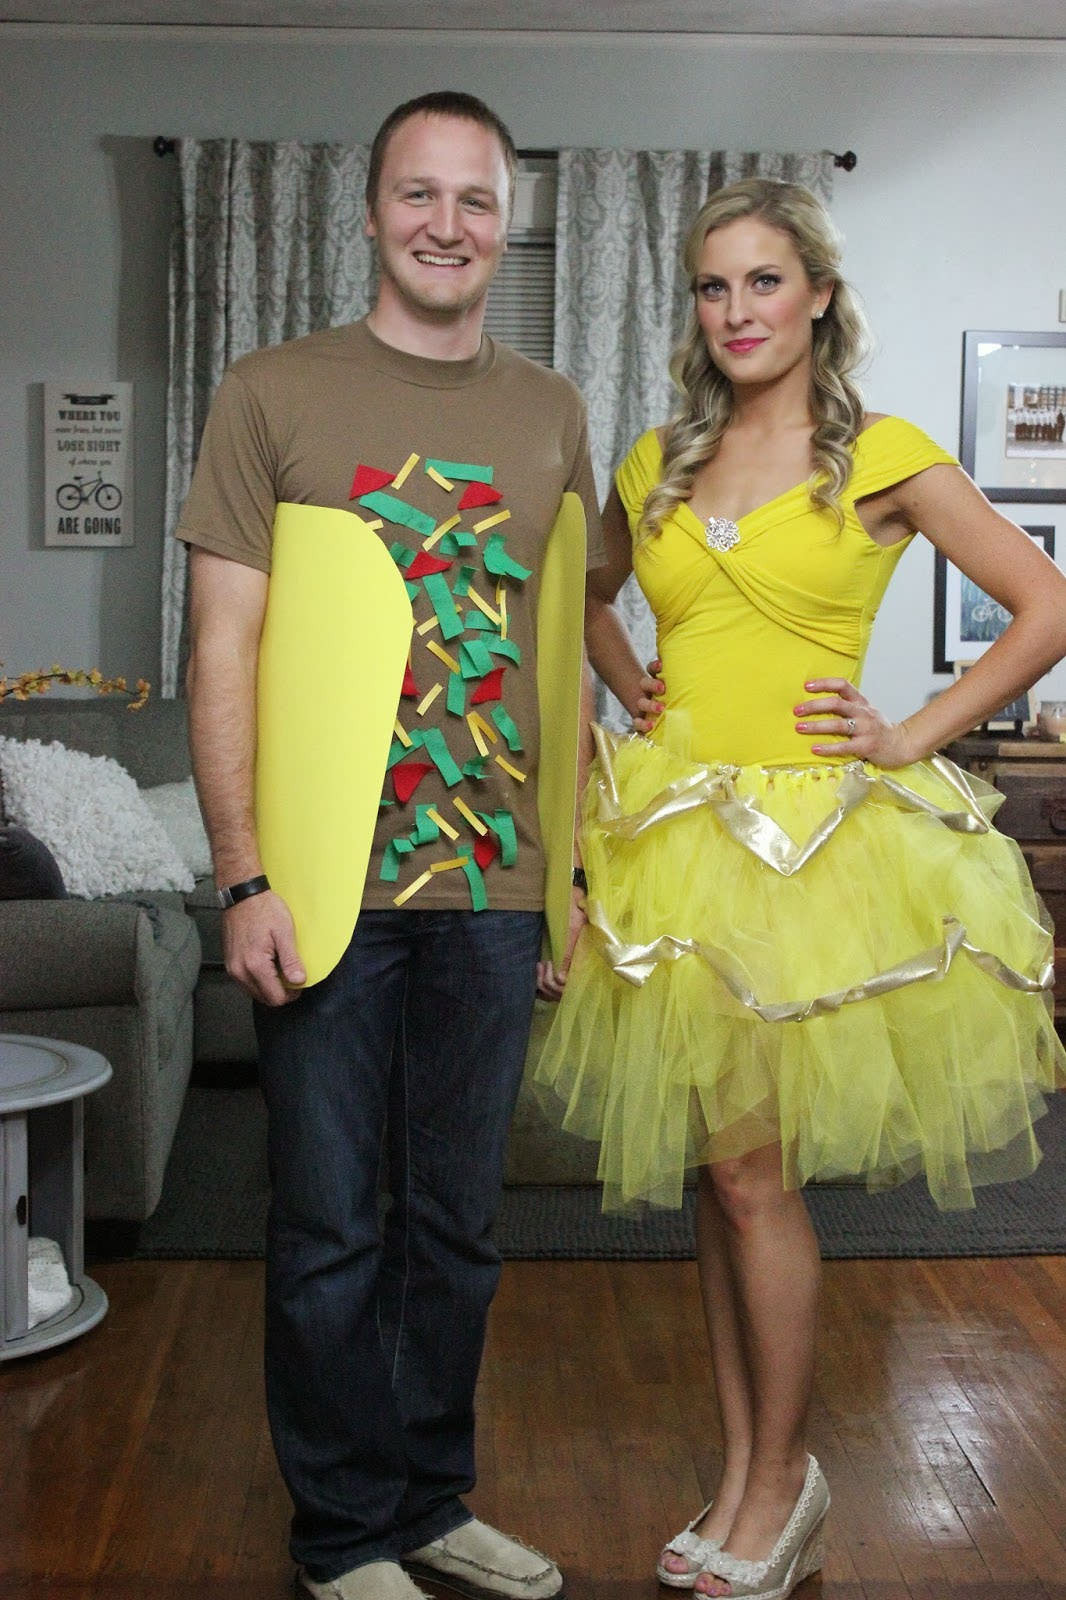 DIY Couples Halloween Costumes
 15 DIY Couples and Family Halloween Costumes